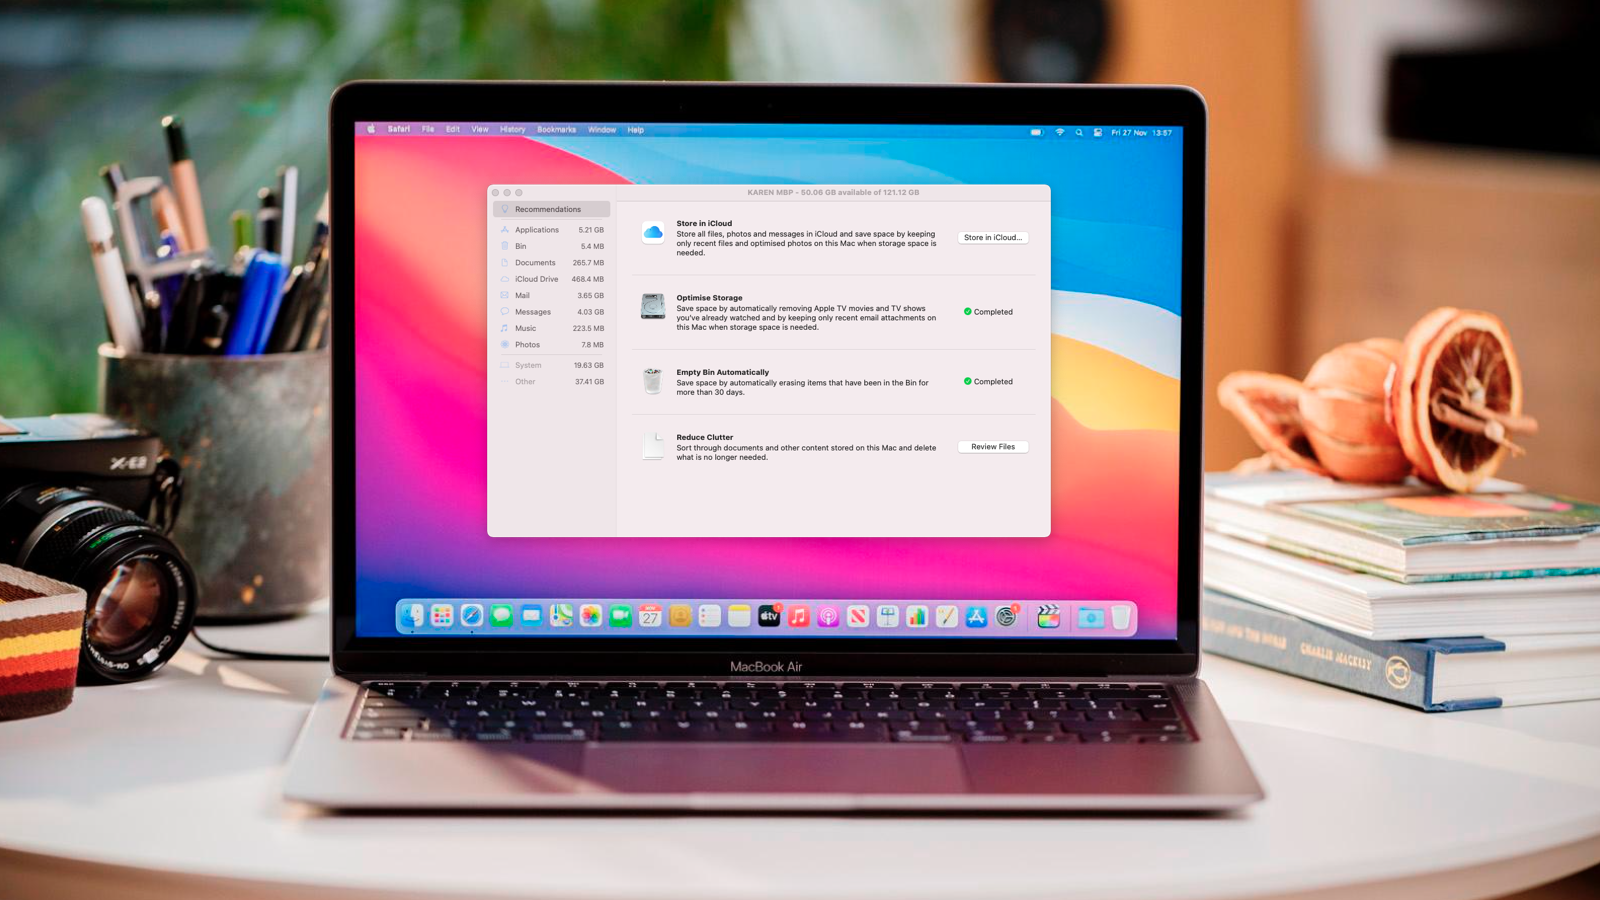 Free up disk space: Delete any unnecessary files or applications to create enough free space on your Mac's hard drive for the Windows support software.
Restart your Mac: Sometimes a simple restart can resolve installation issues. Restart your Mac and try running Boot Camp Assistant again.